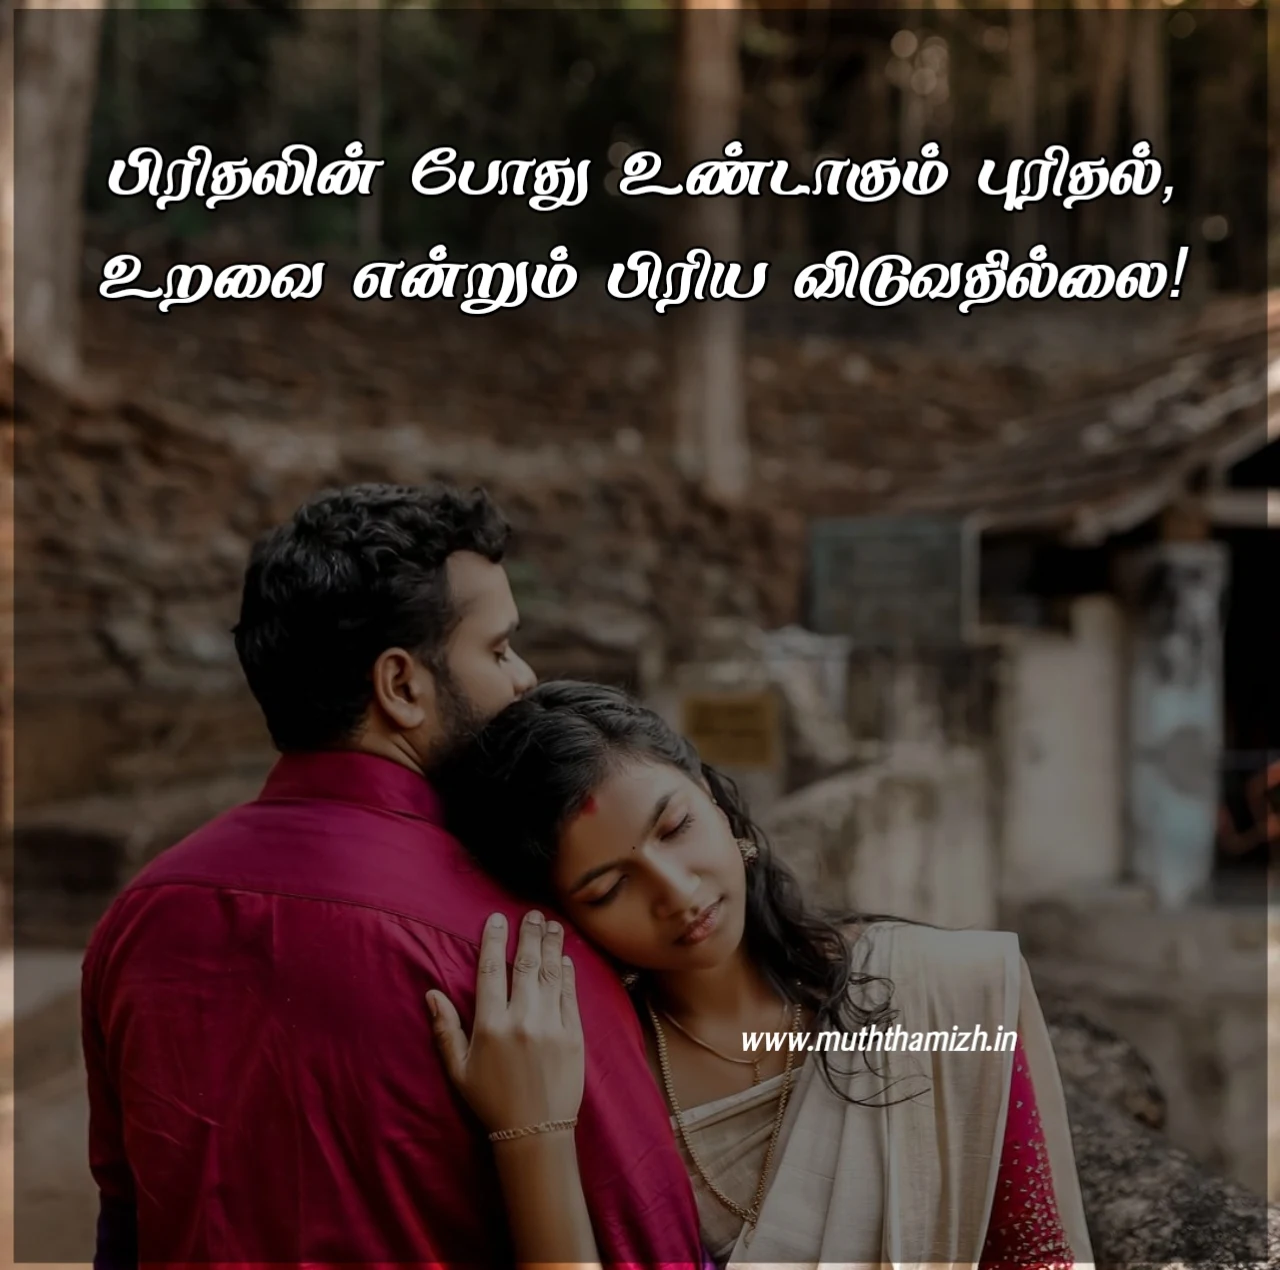 Tamil Love Quotes with Images